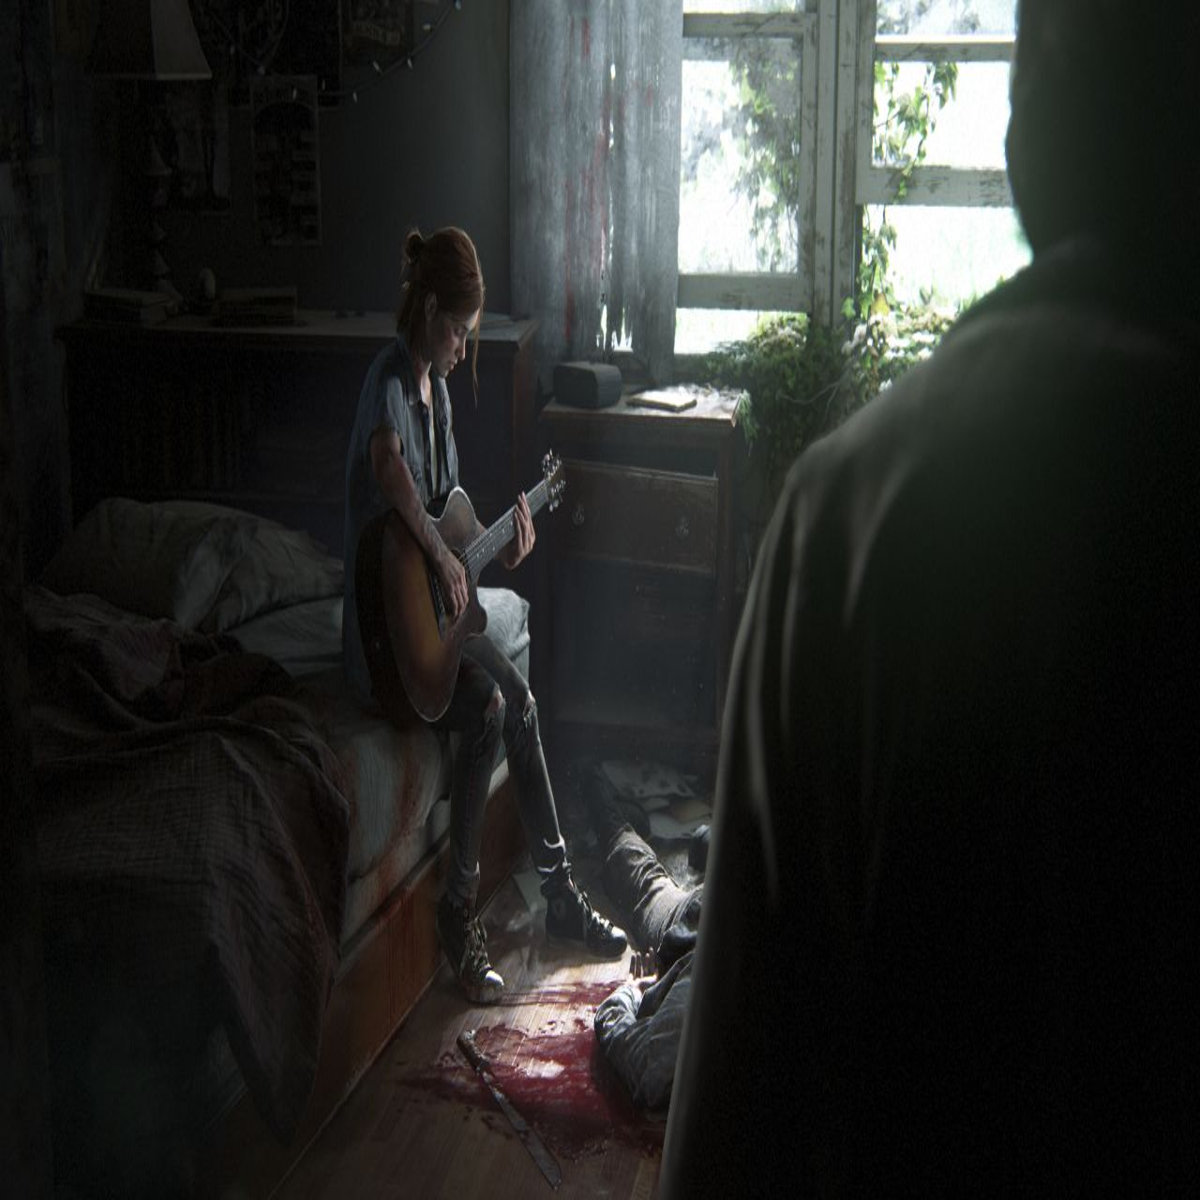 The Last of Us fans have a huge Part 2 theory